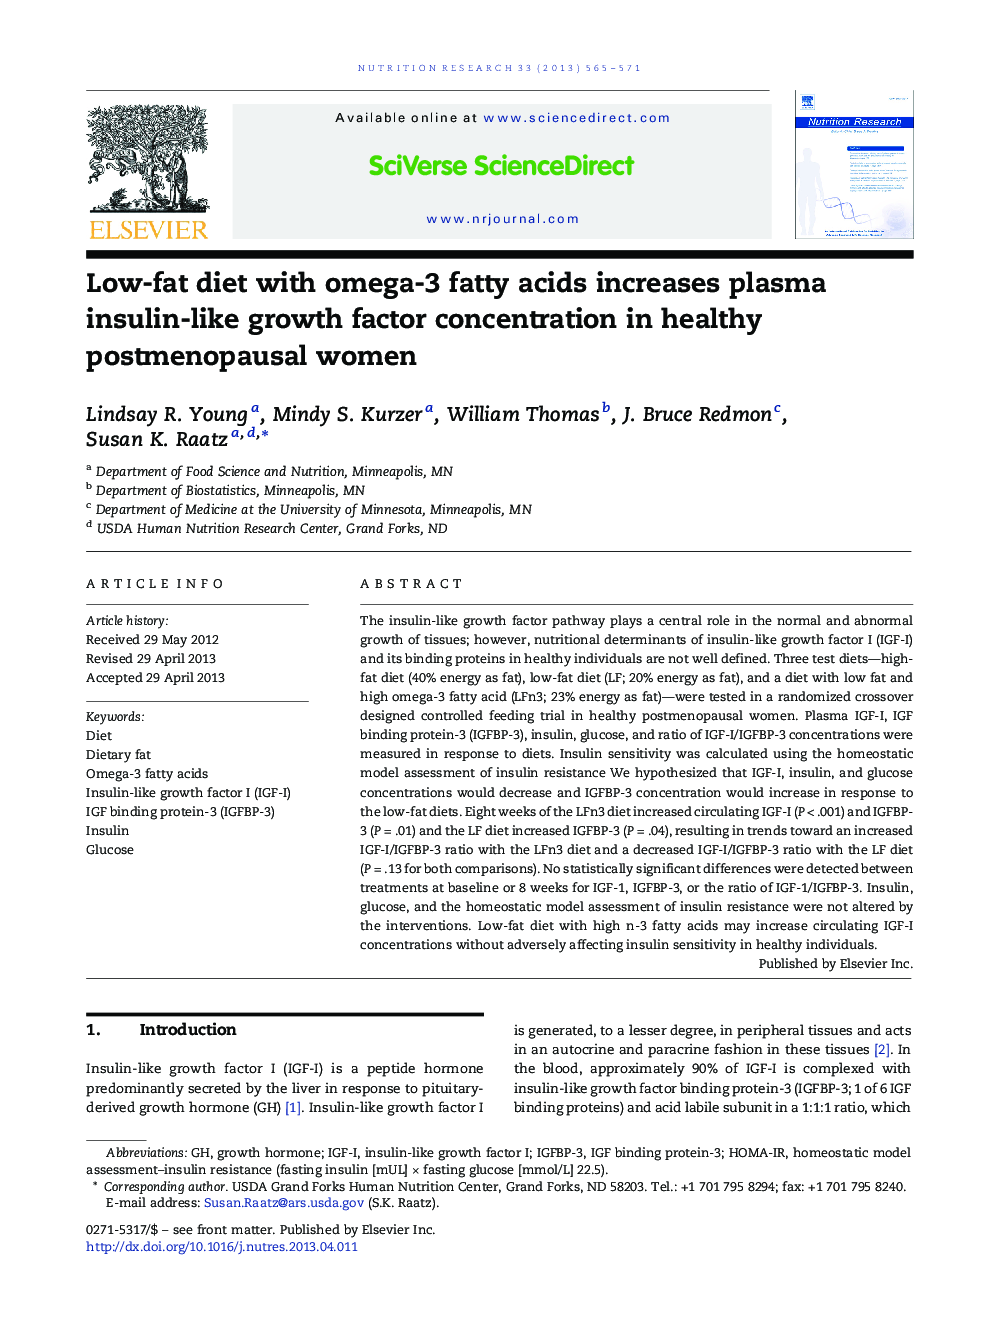 Low-fat diet with omega-3 fatty acids increases plasma insulin-like growth factor concentration in healthy postmenopausal women